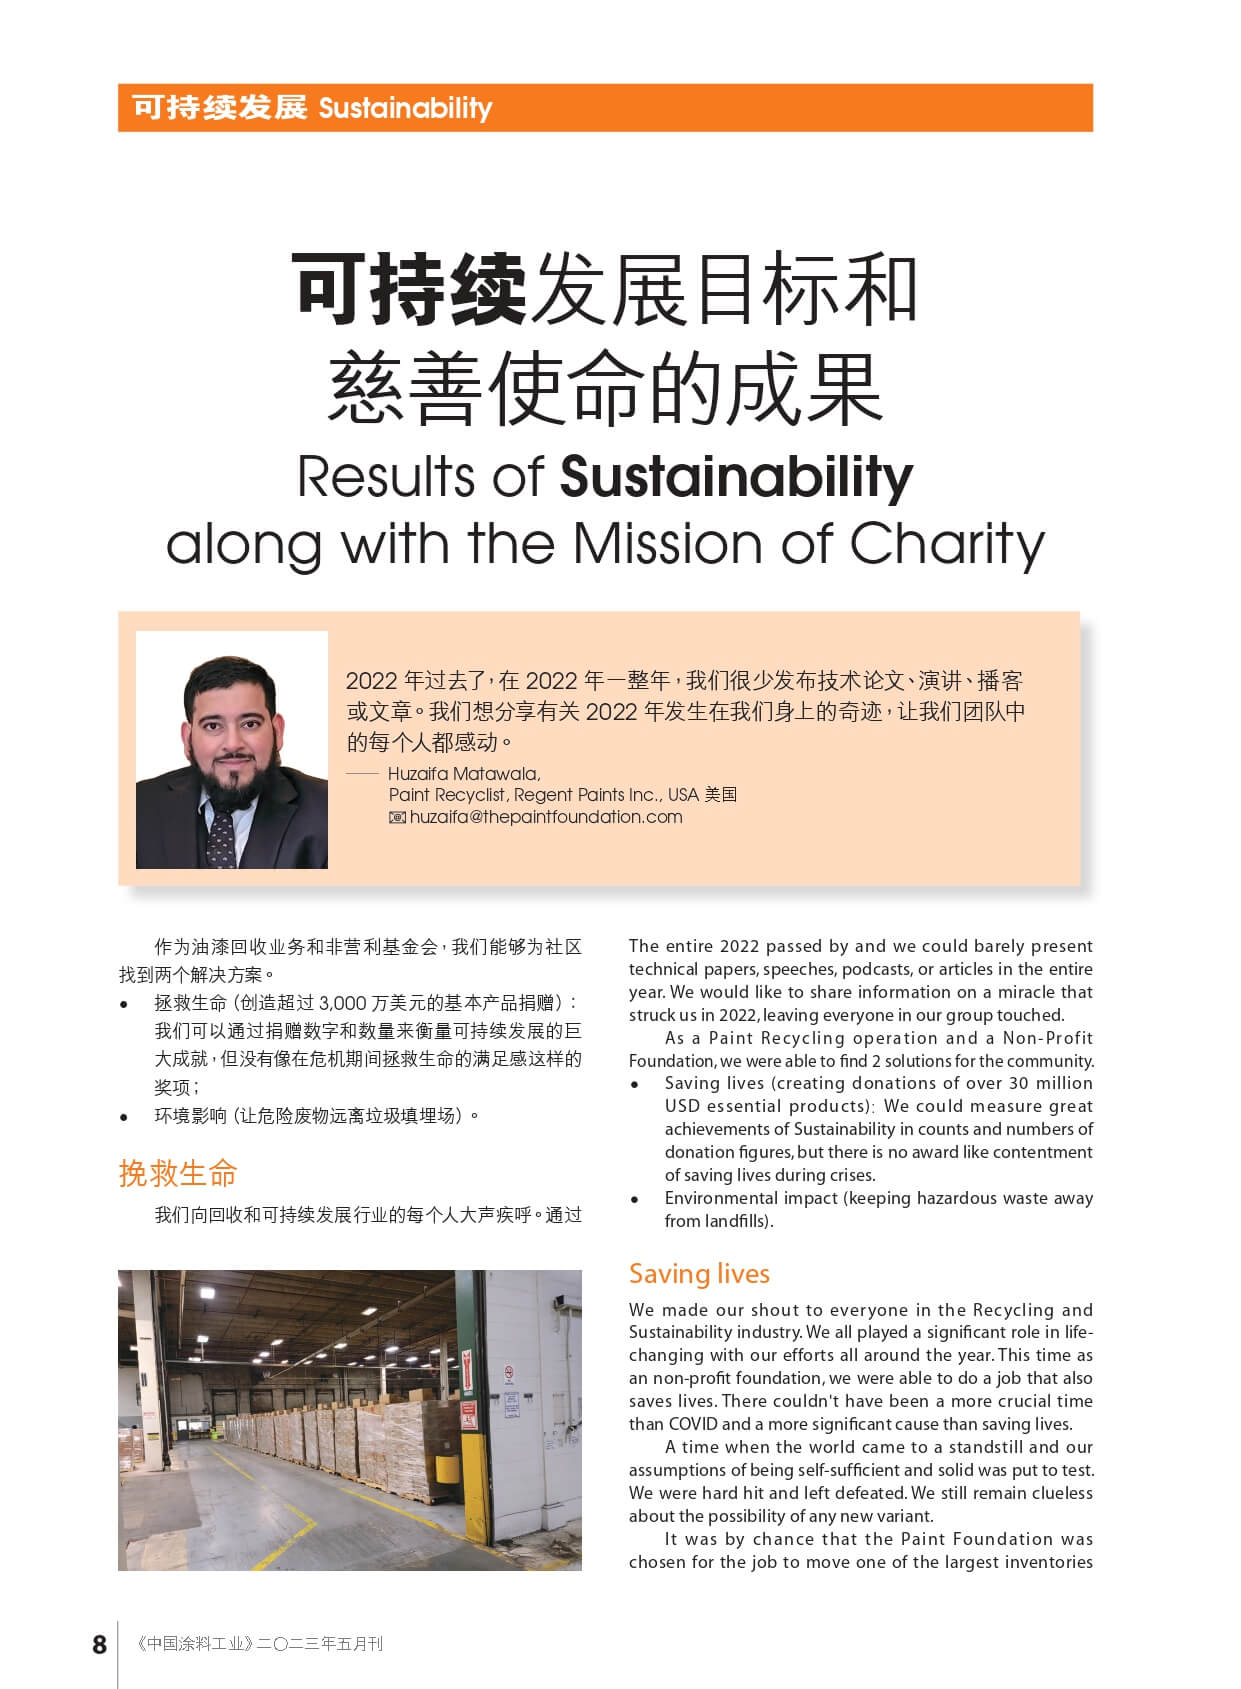 Results of Sustainability along with the Mission of Charity